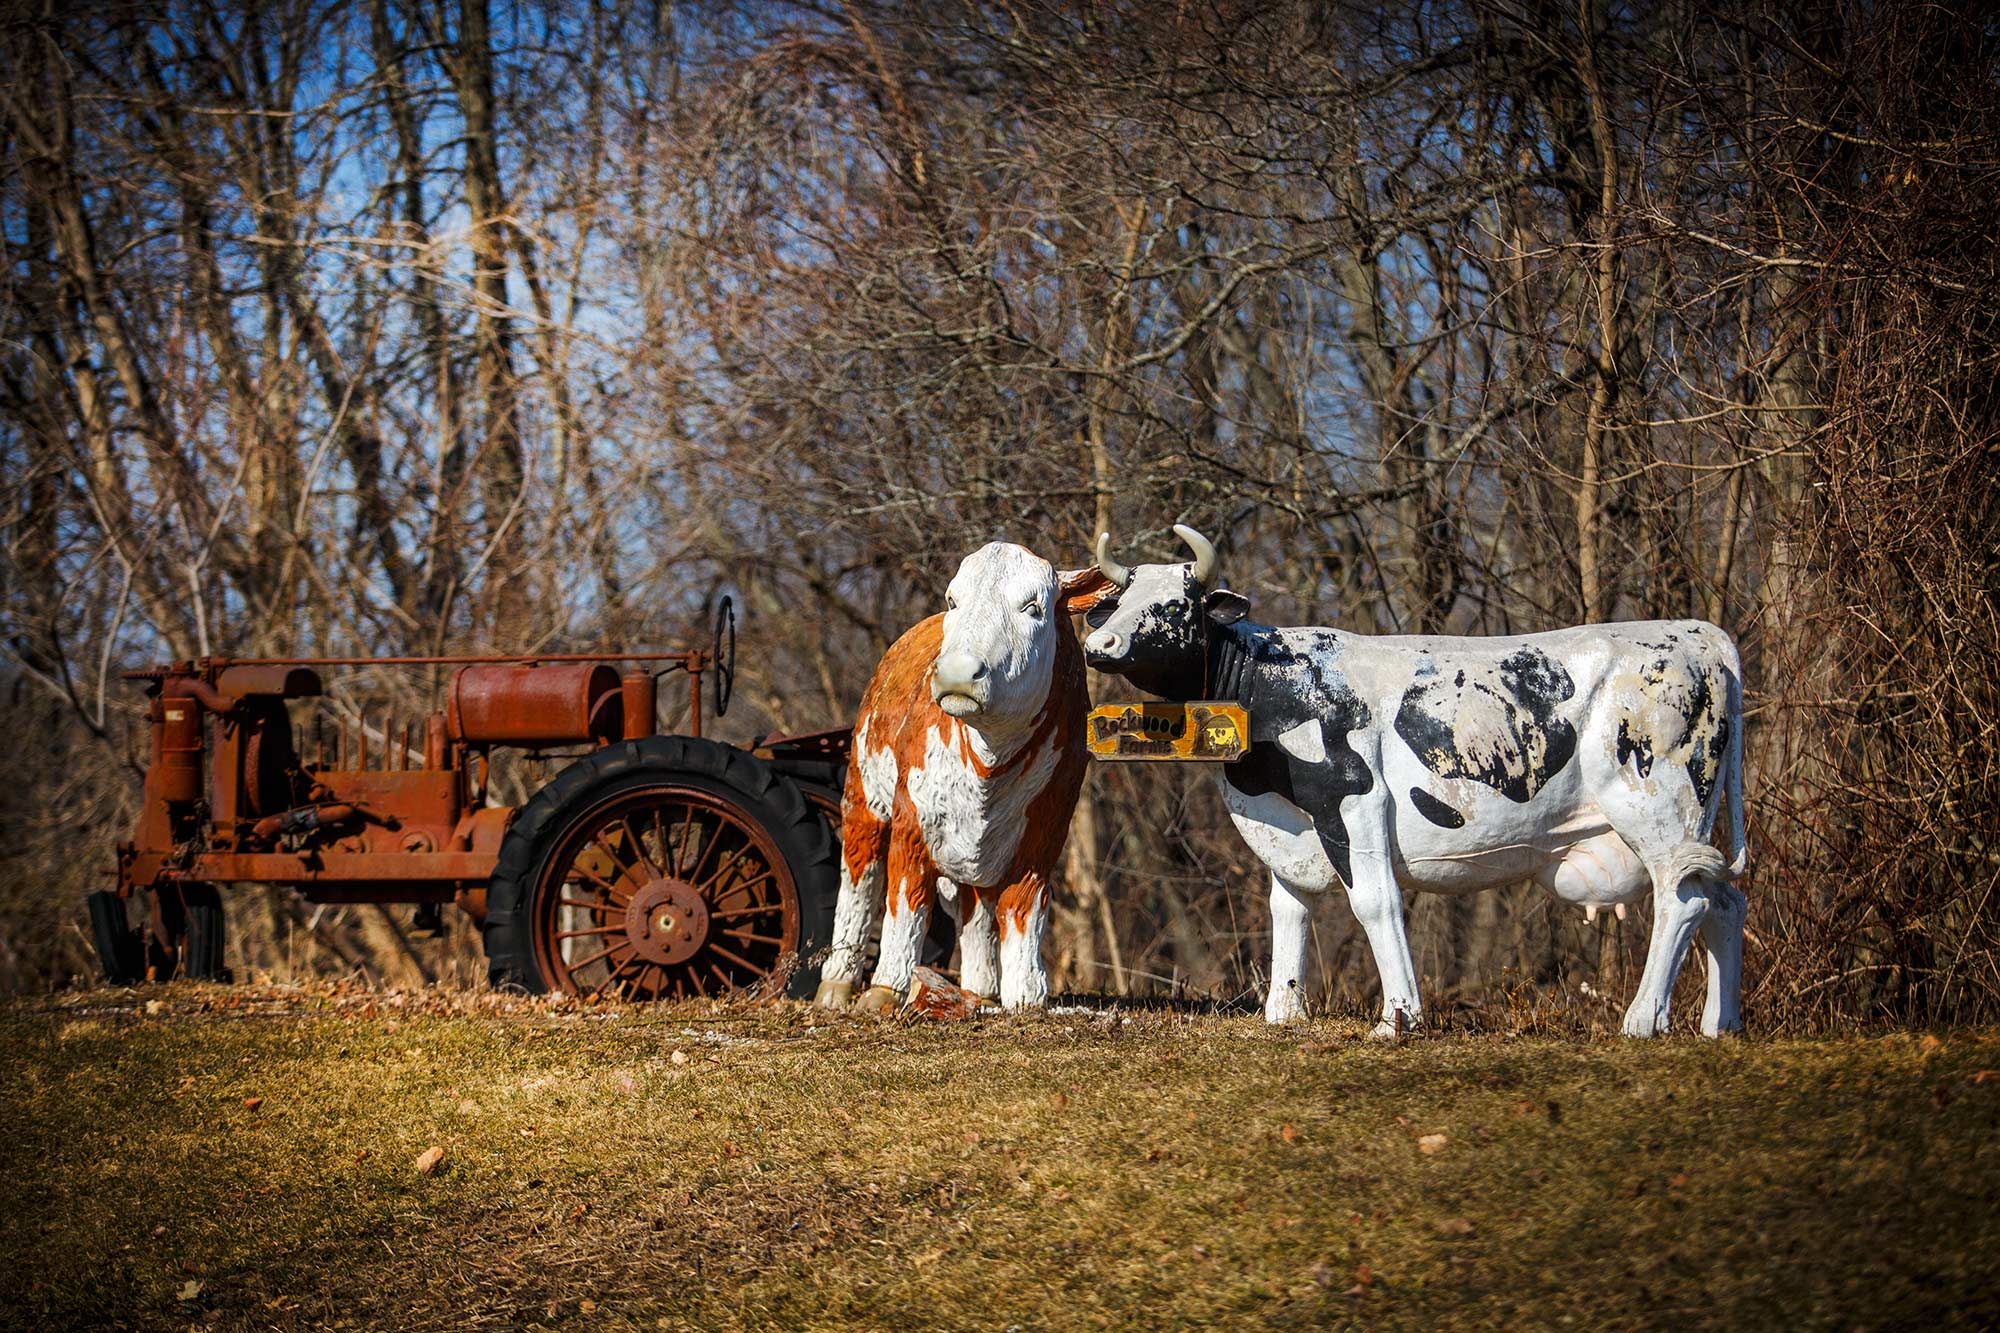 Odd place for cows, East Granby, CT - 4/2/15